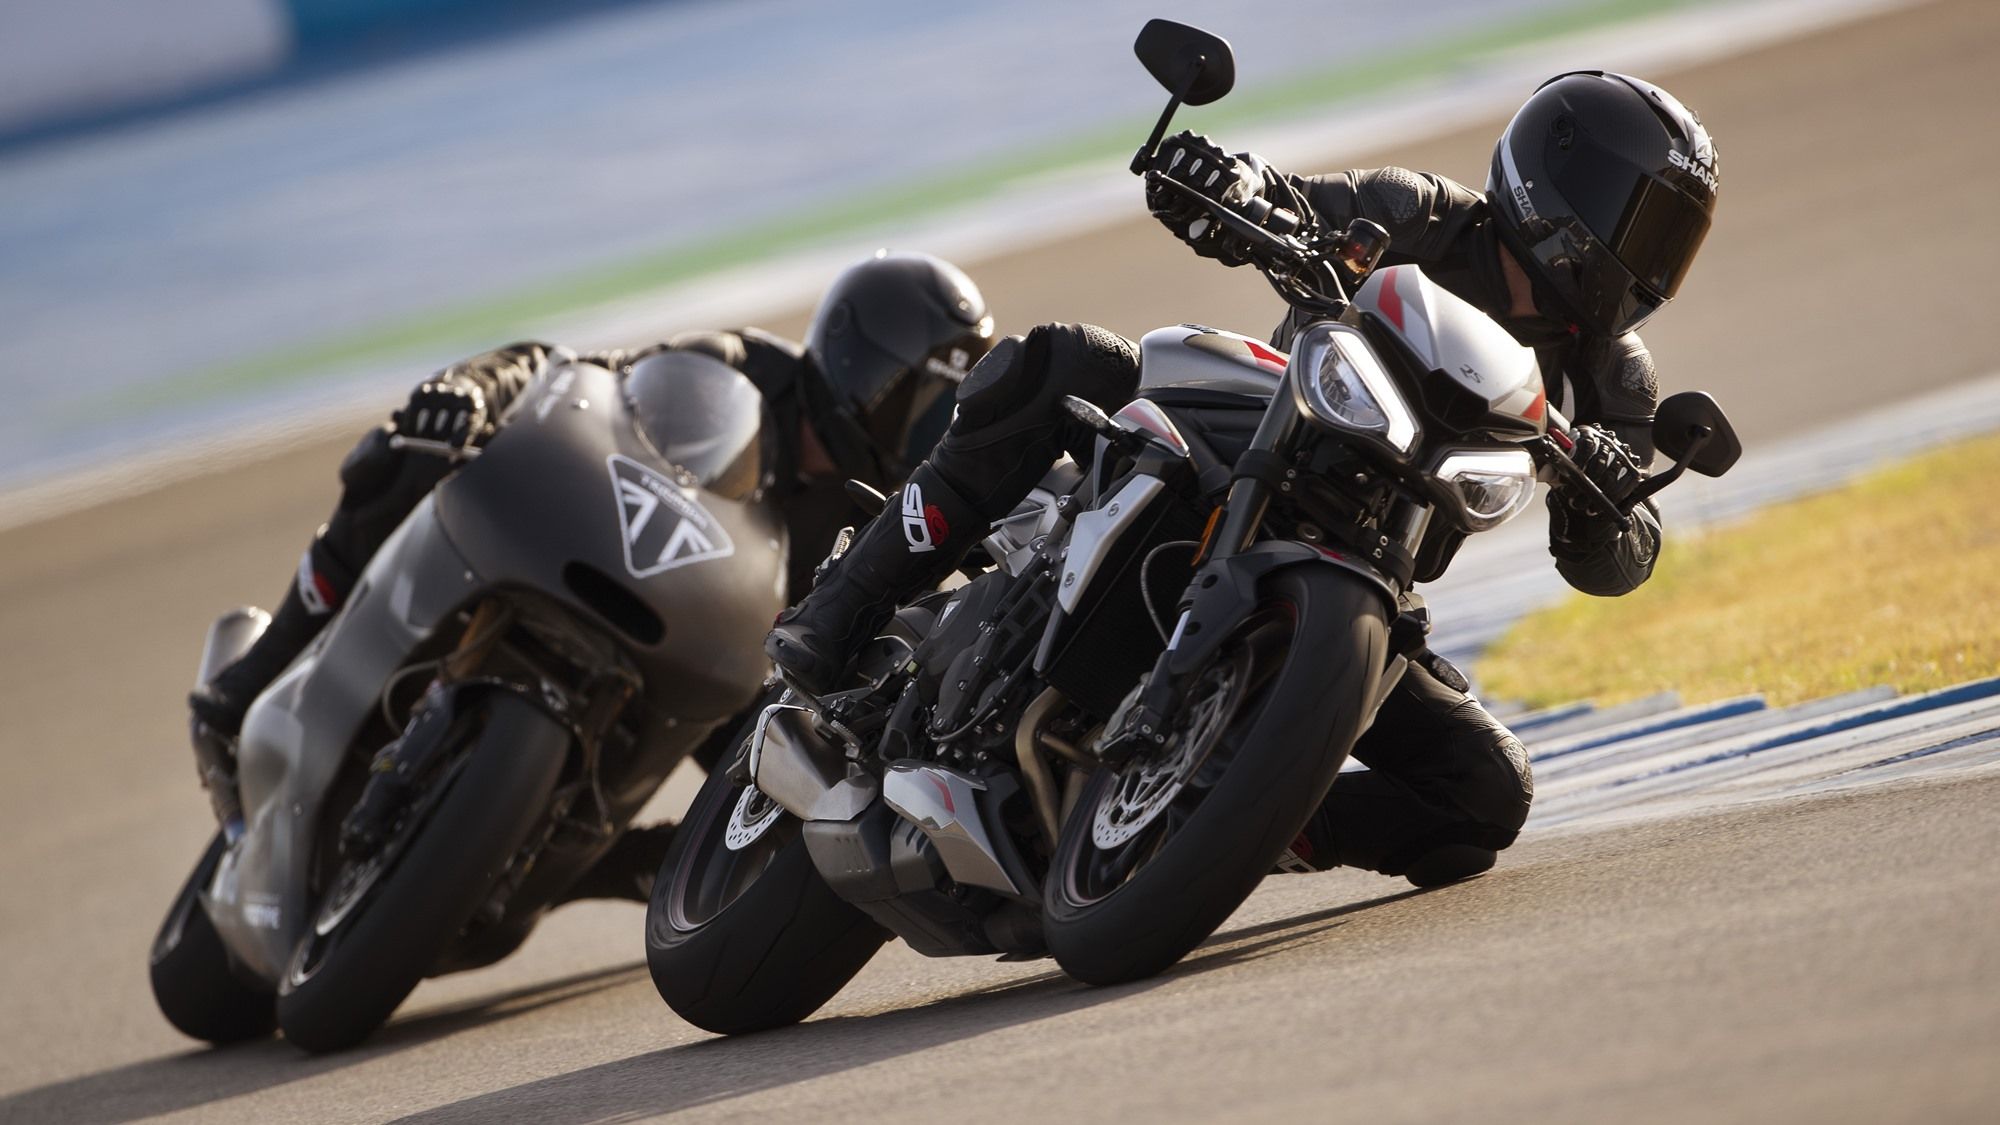 The new 2020 Triumph Street Triple RS is 123 Ps and 166 kg